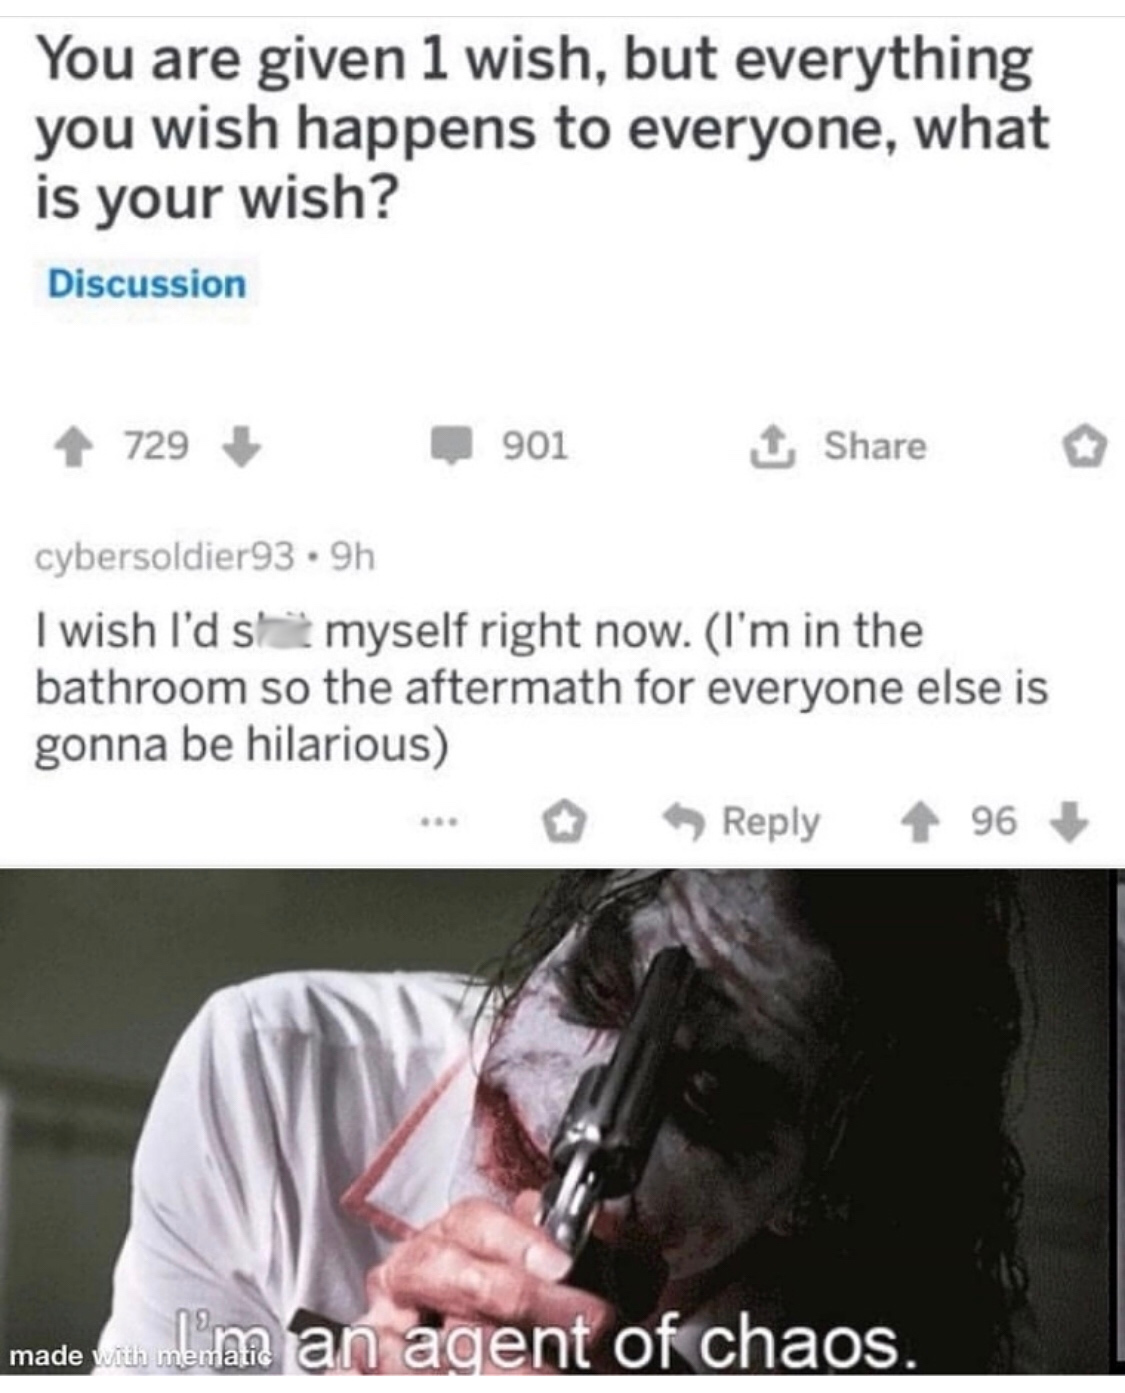 Internet meme - You are given 1 wish, but everything you wish happens to everyone, what is your wish? Discussion 729 901 1 cybersoldier93.9h I wish I'd s myself right now. I'm in the bathroom so the aftermath for everyone else is gonna be hilarious ... 96